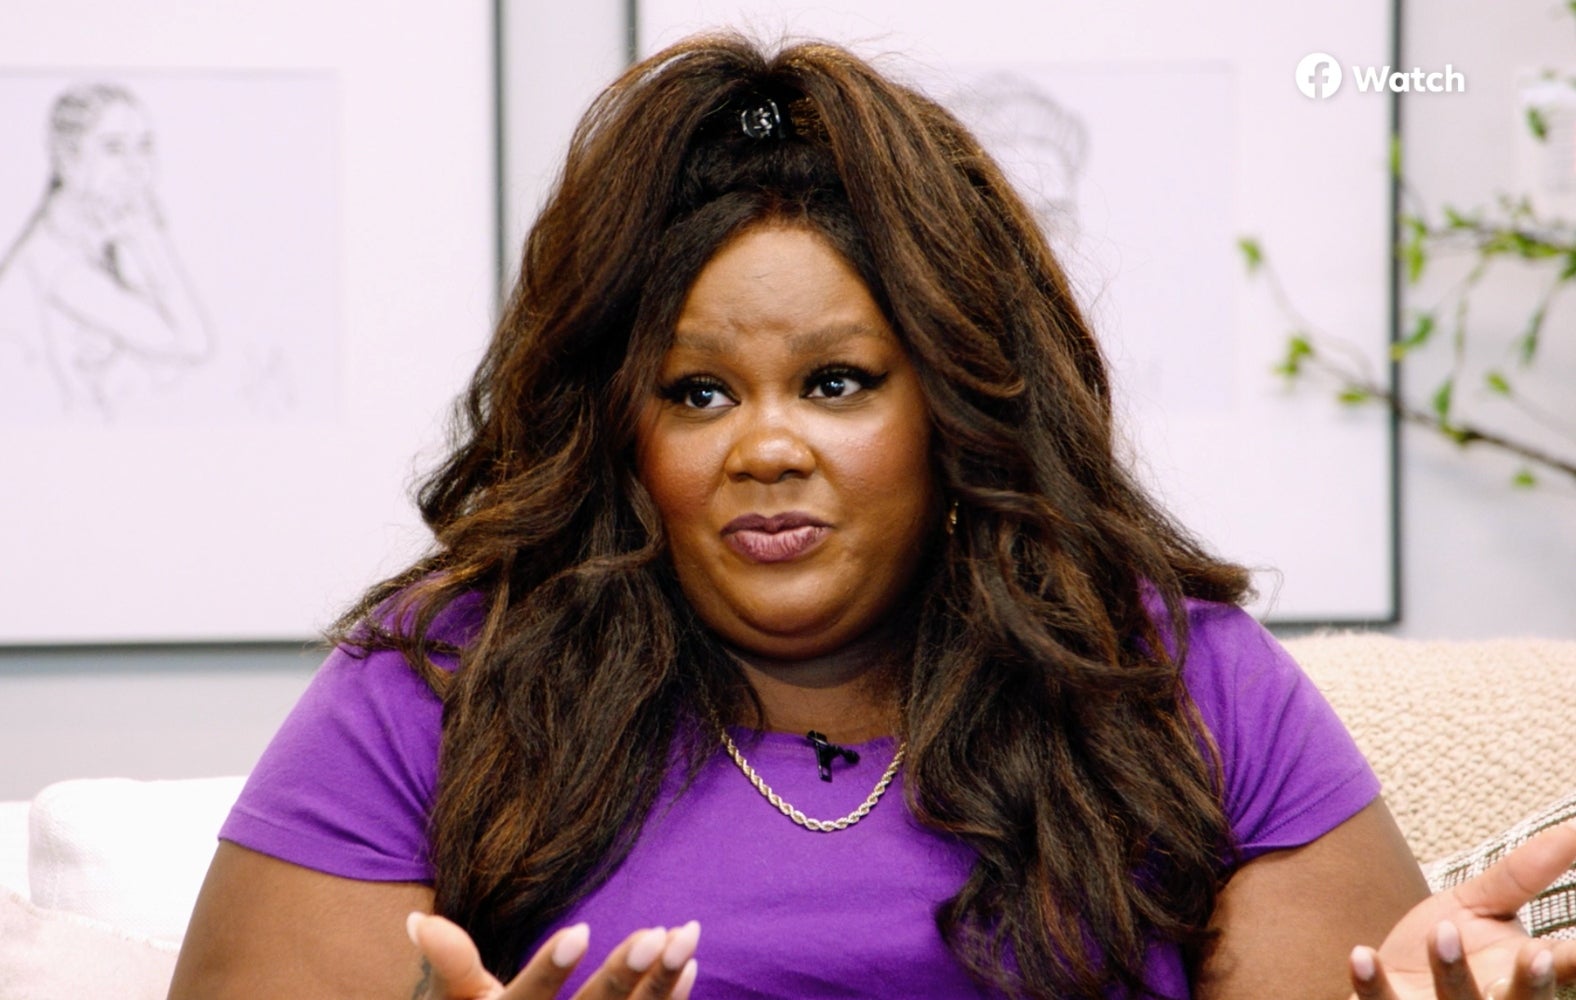 Nicole Byer On Being Diagnosed With ADHD As An Adult, What People Get Wrong About The Condition